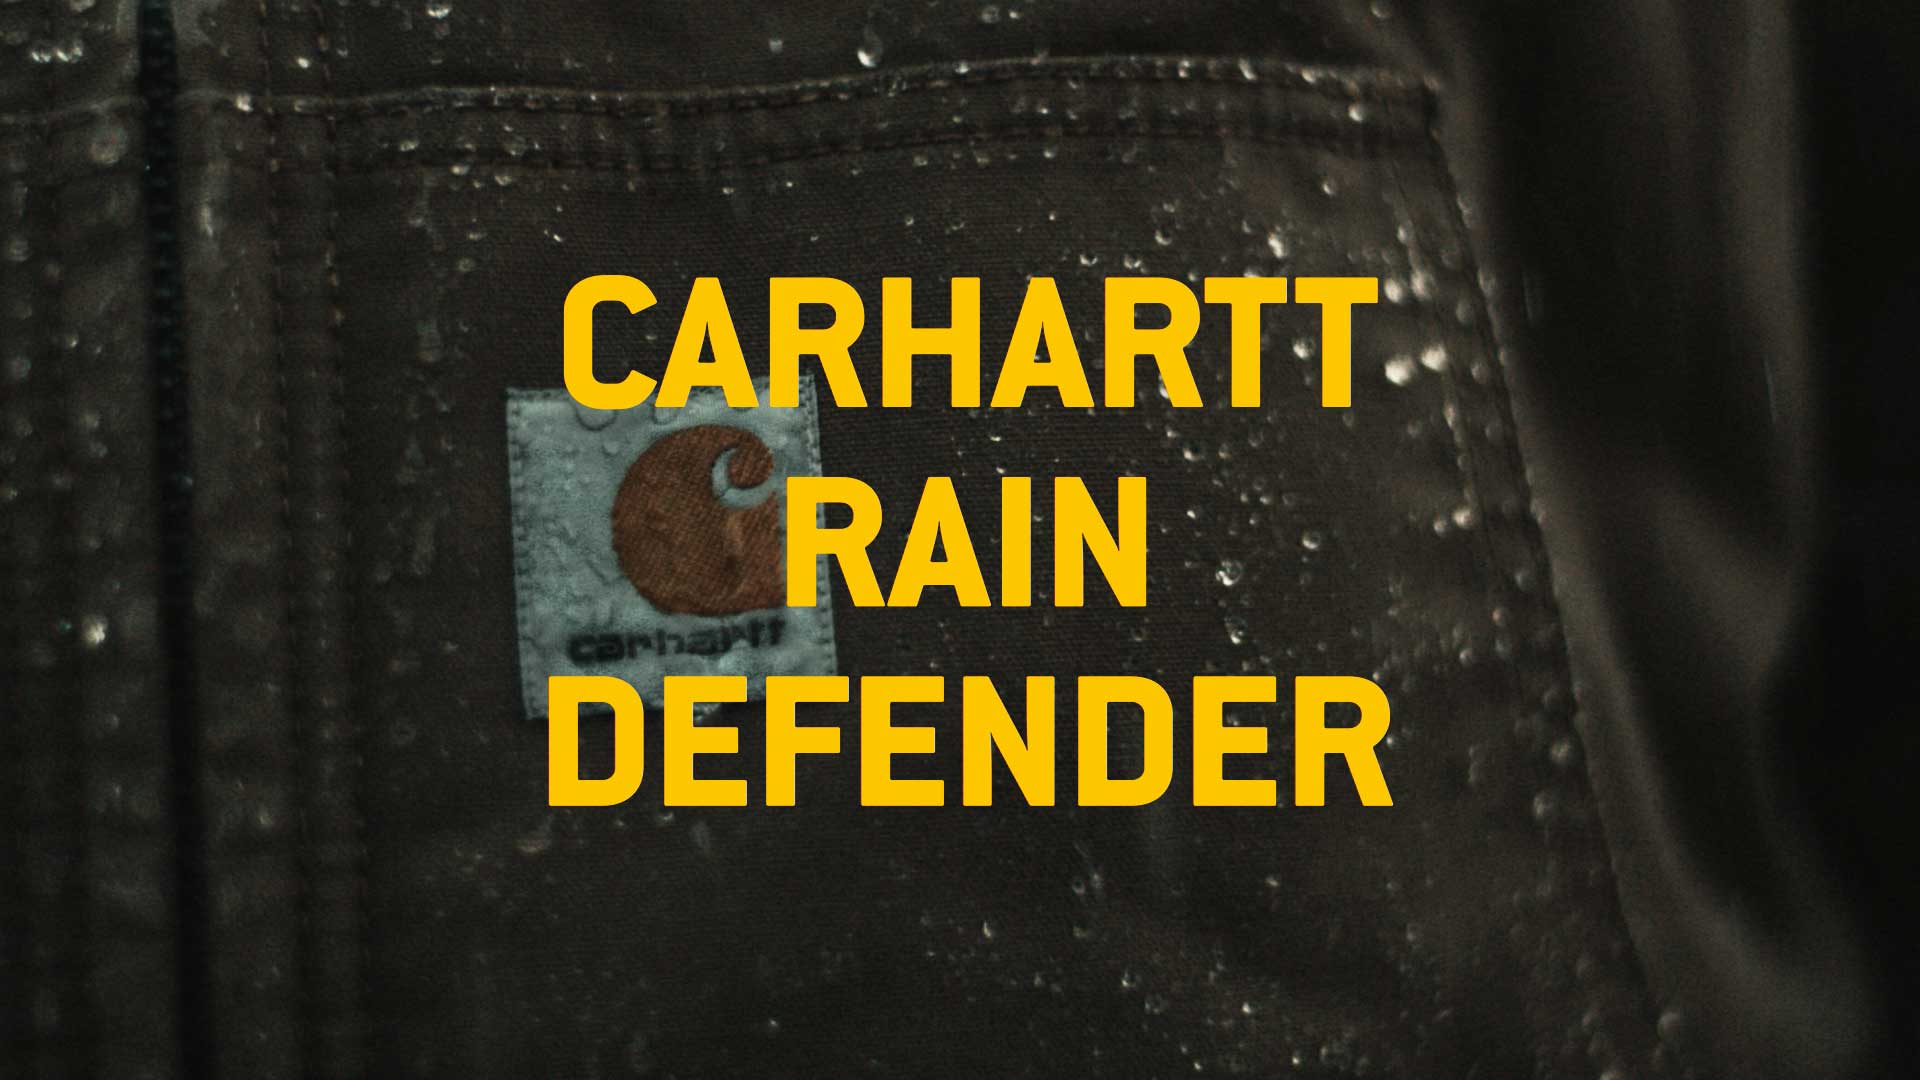 Carhartt S Fall Campaign Featuring Rain Defender Enables Workers